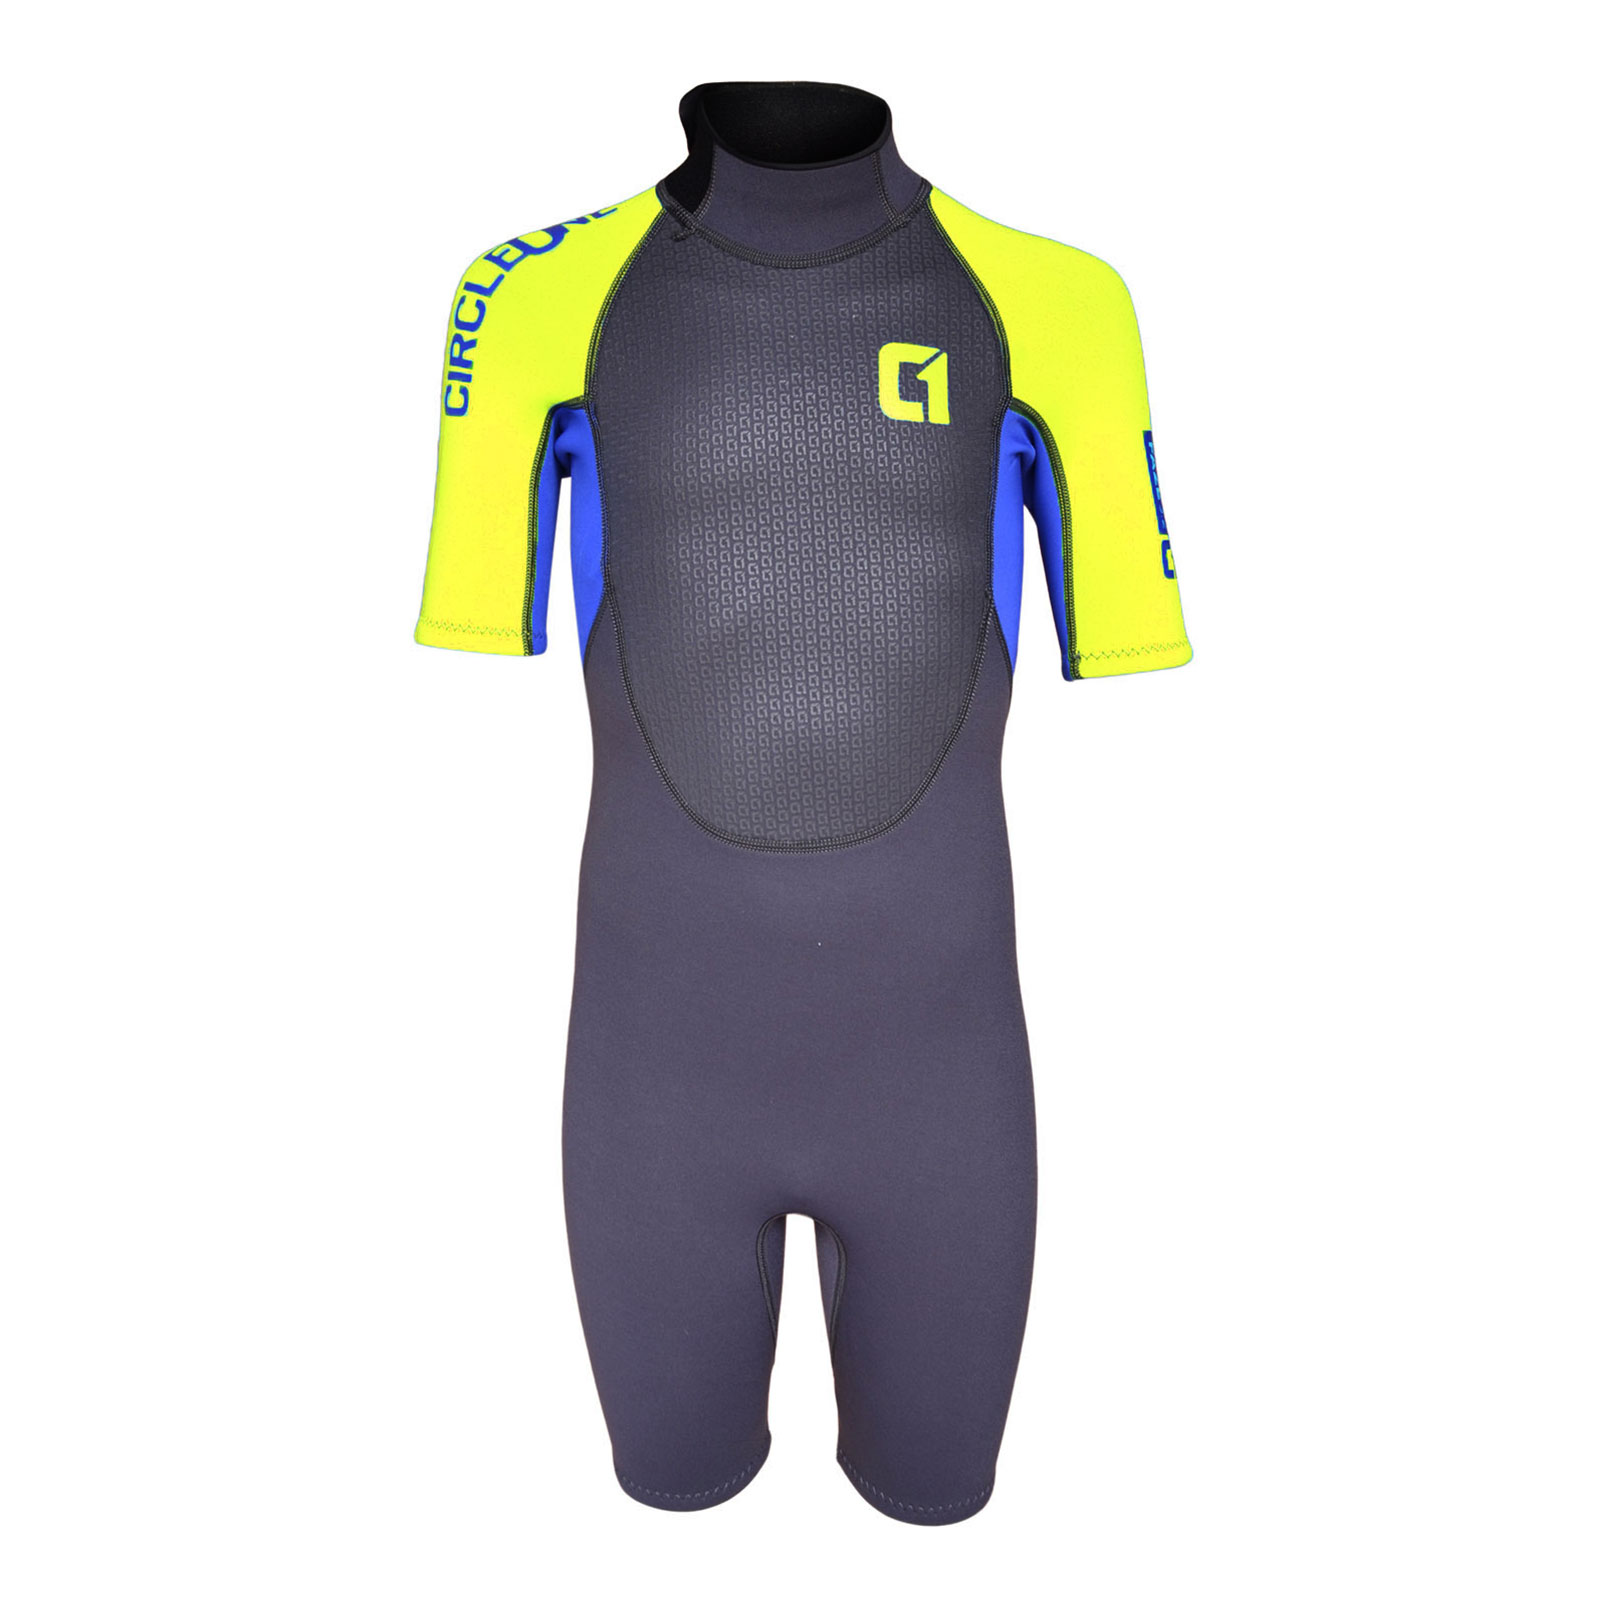 Kids Shorty Wetsuit by Circle One | 3mm Neoprene | Full UV Protection